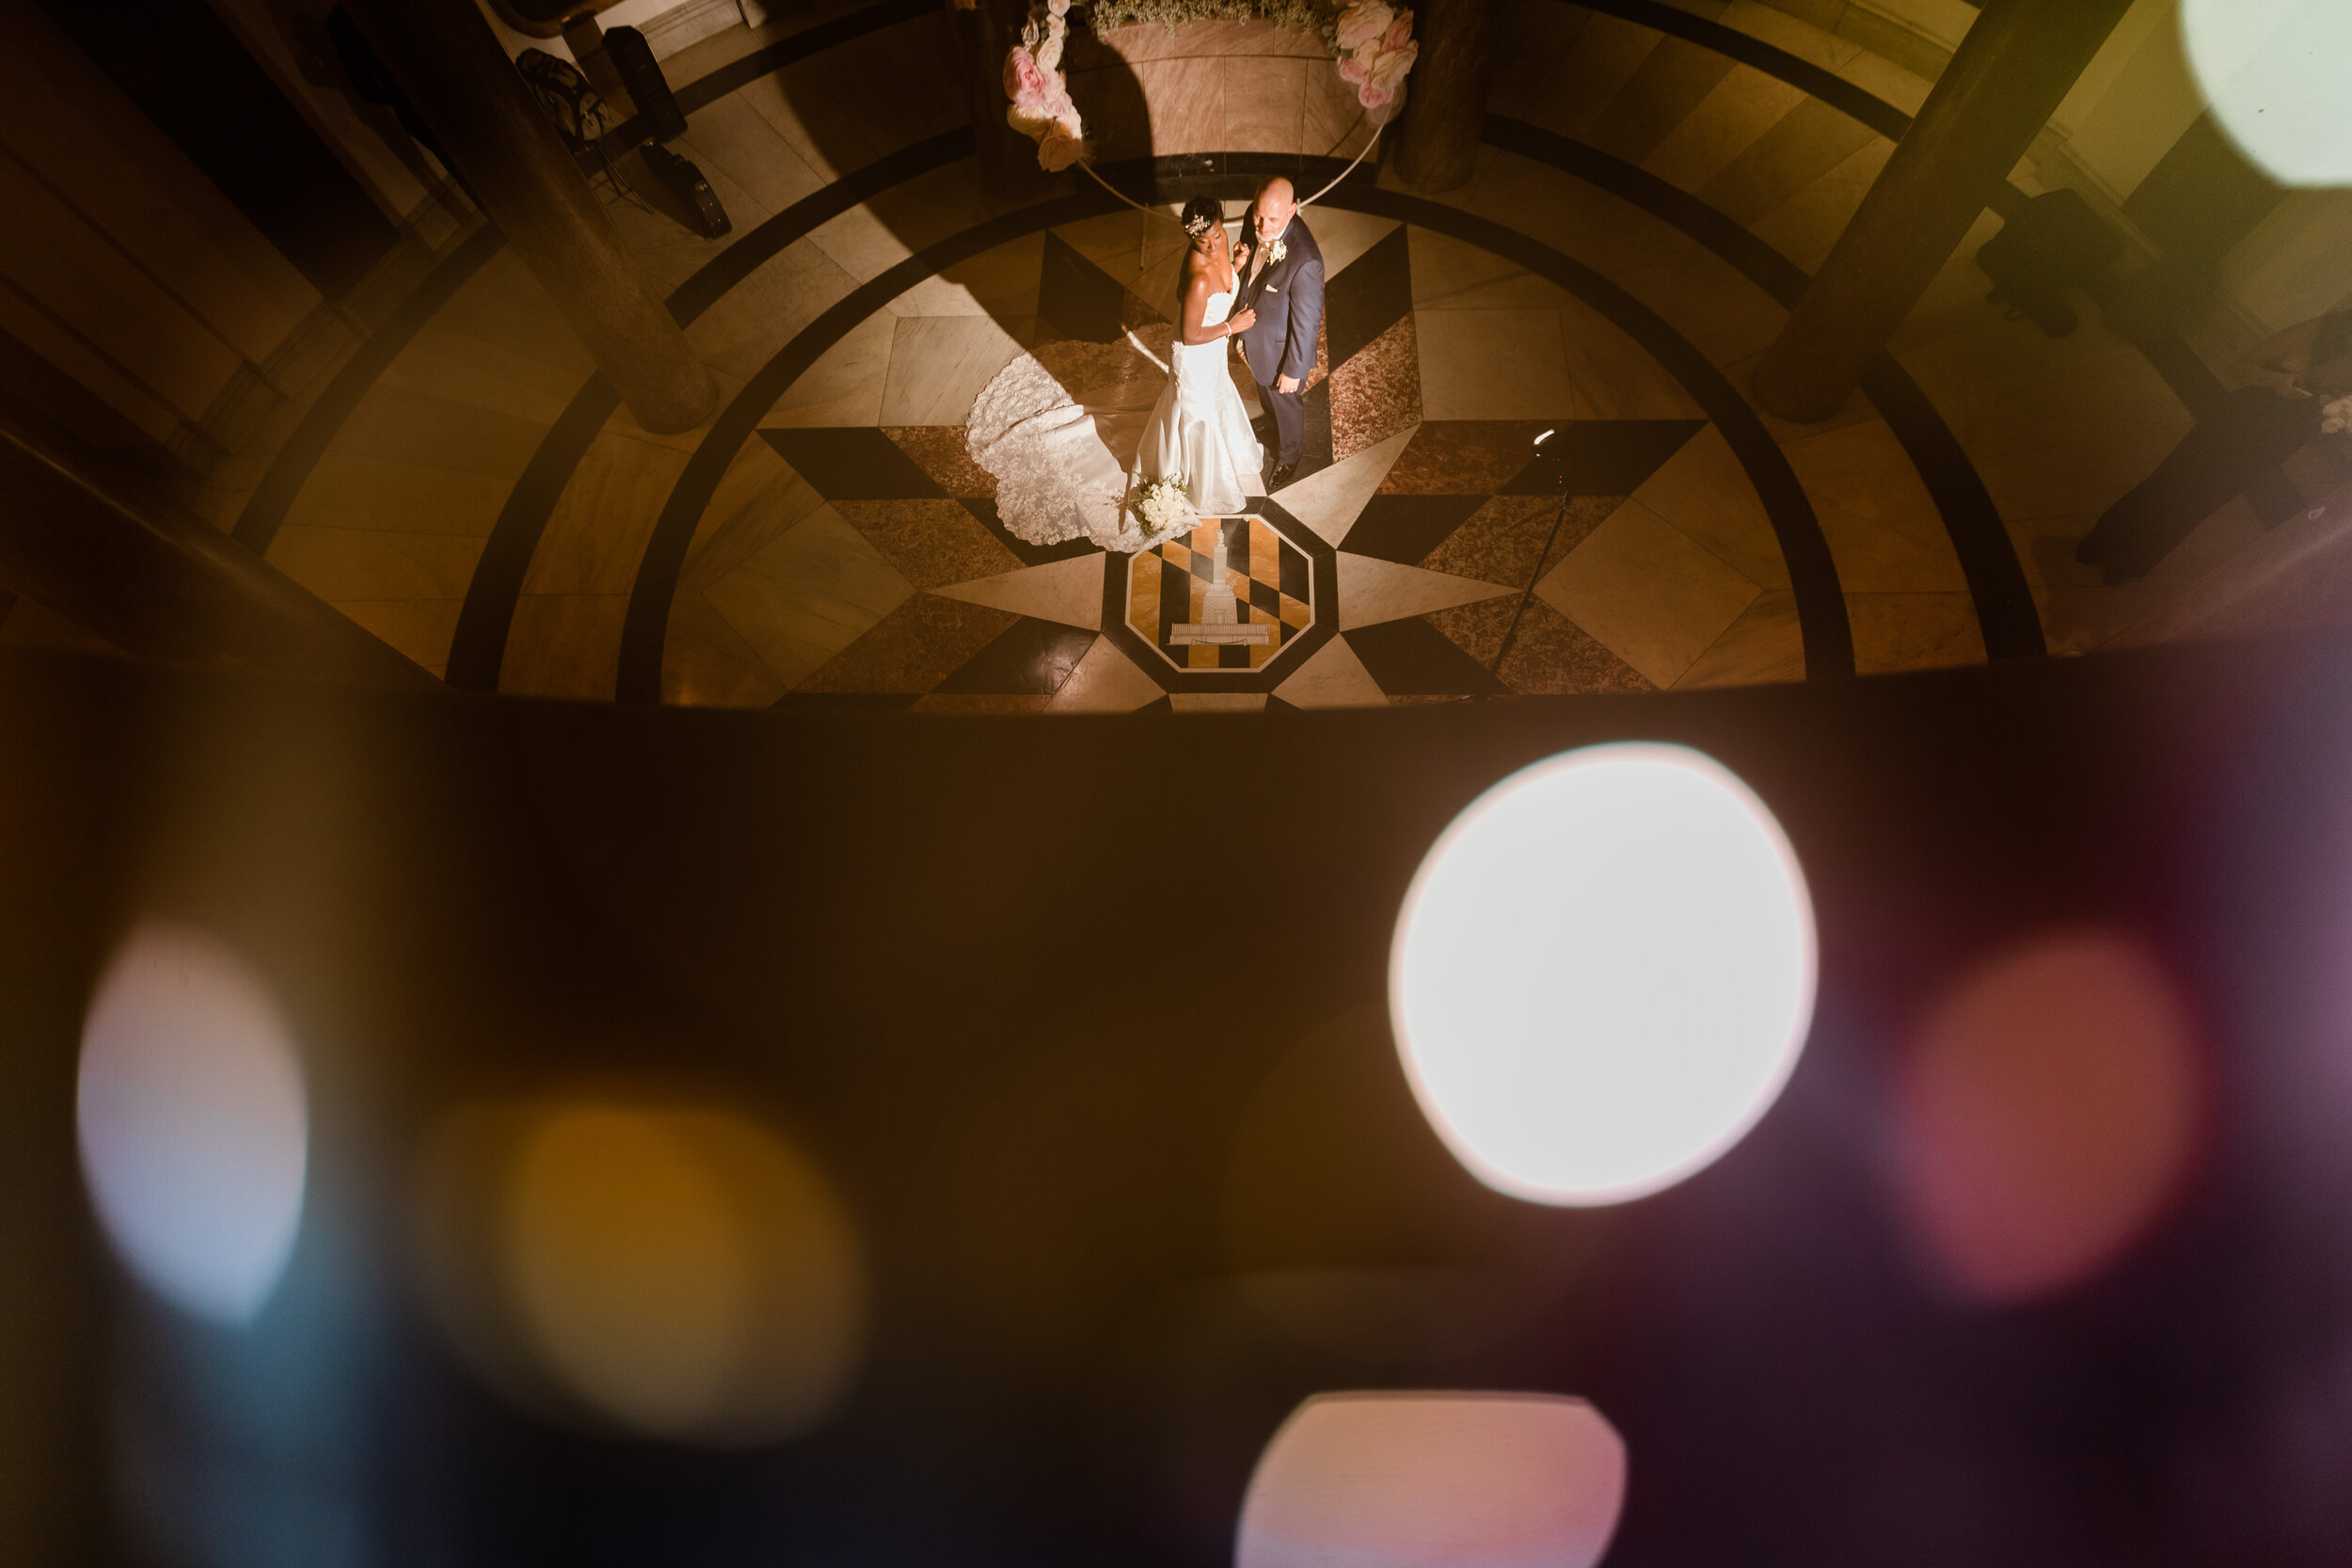 get married in baltimore city hall shot by megapixels media biracial couple wedding photographers maryland-88.jpg